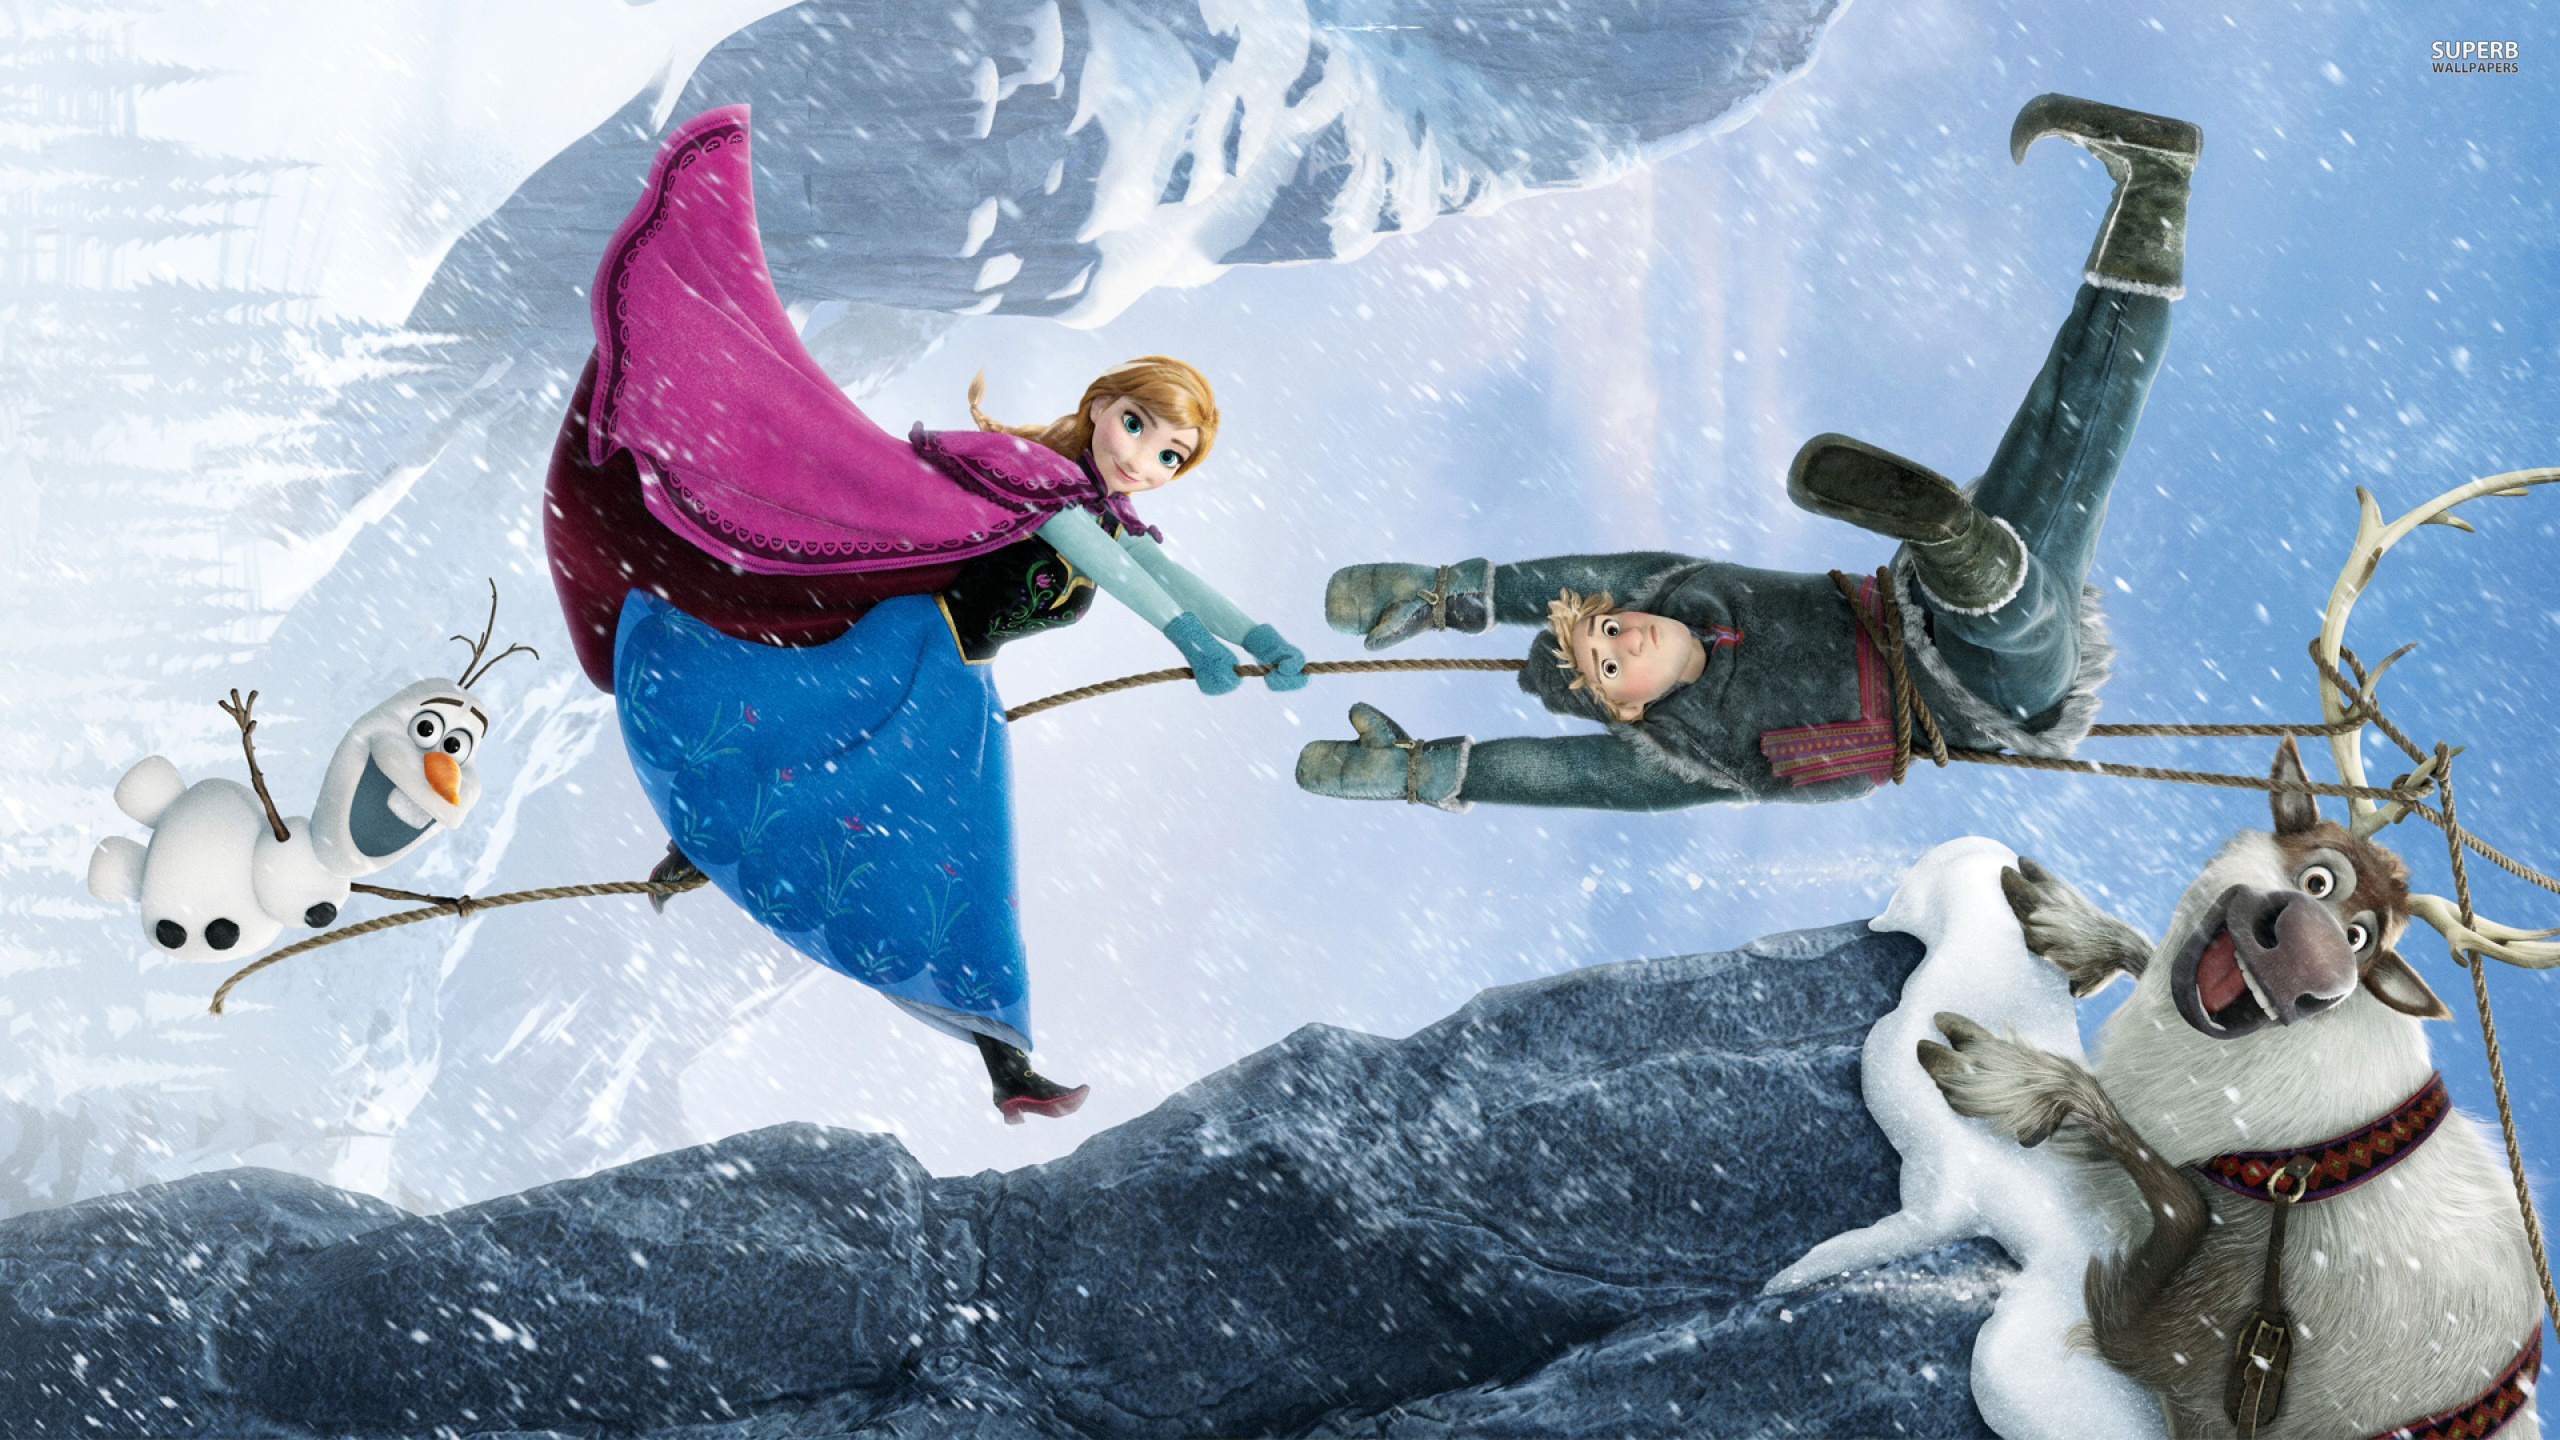 Frozen moment from movie wallpapers and images   wallpapers pictures